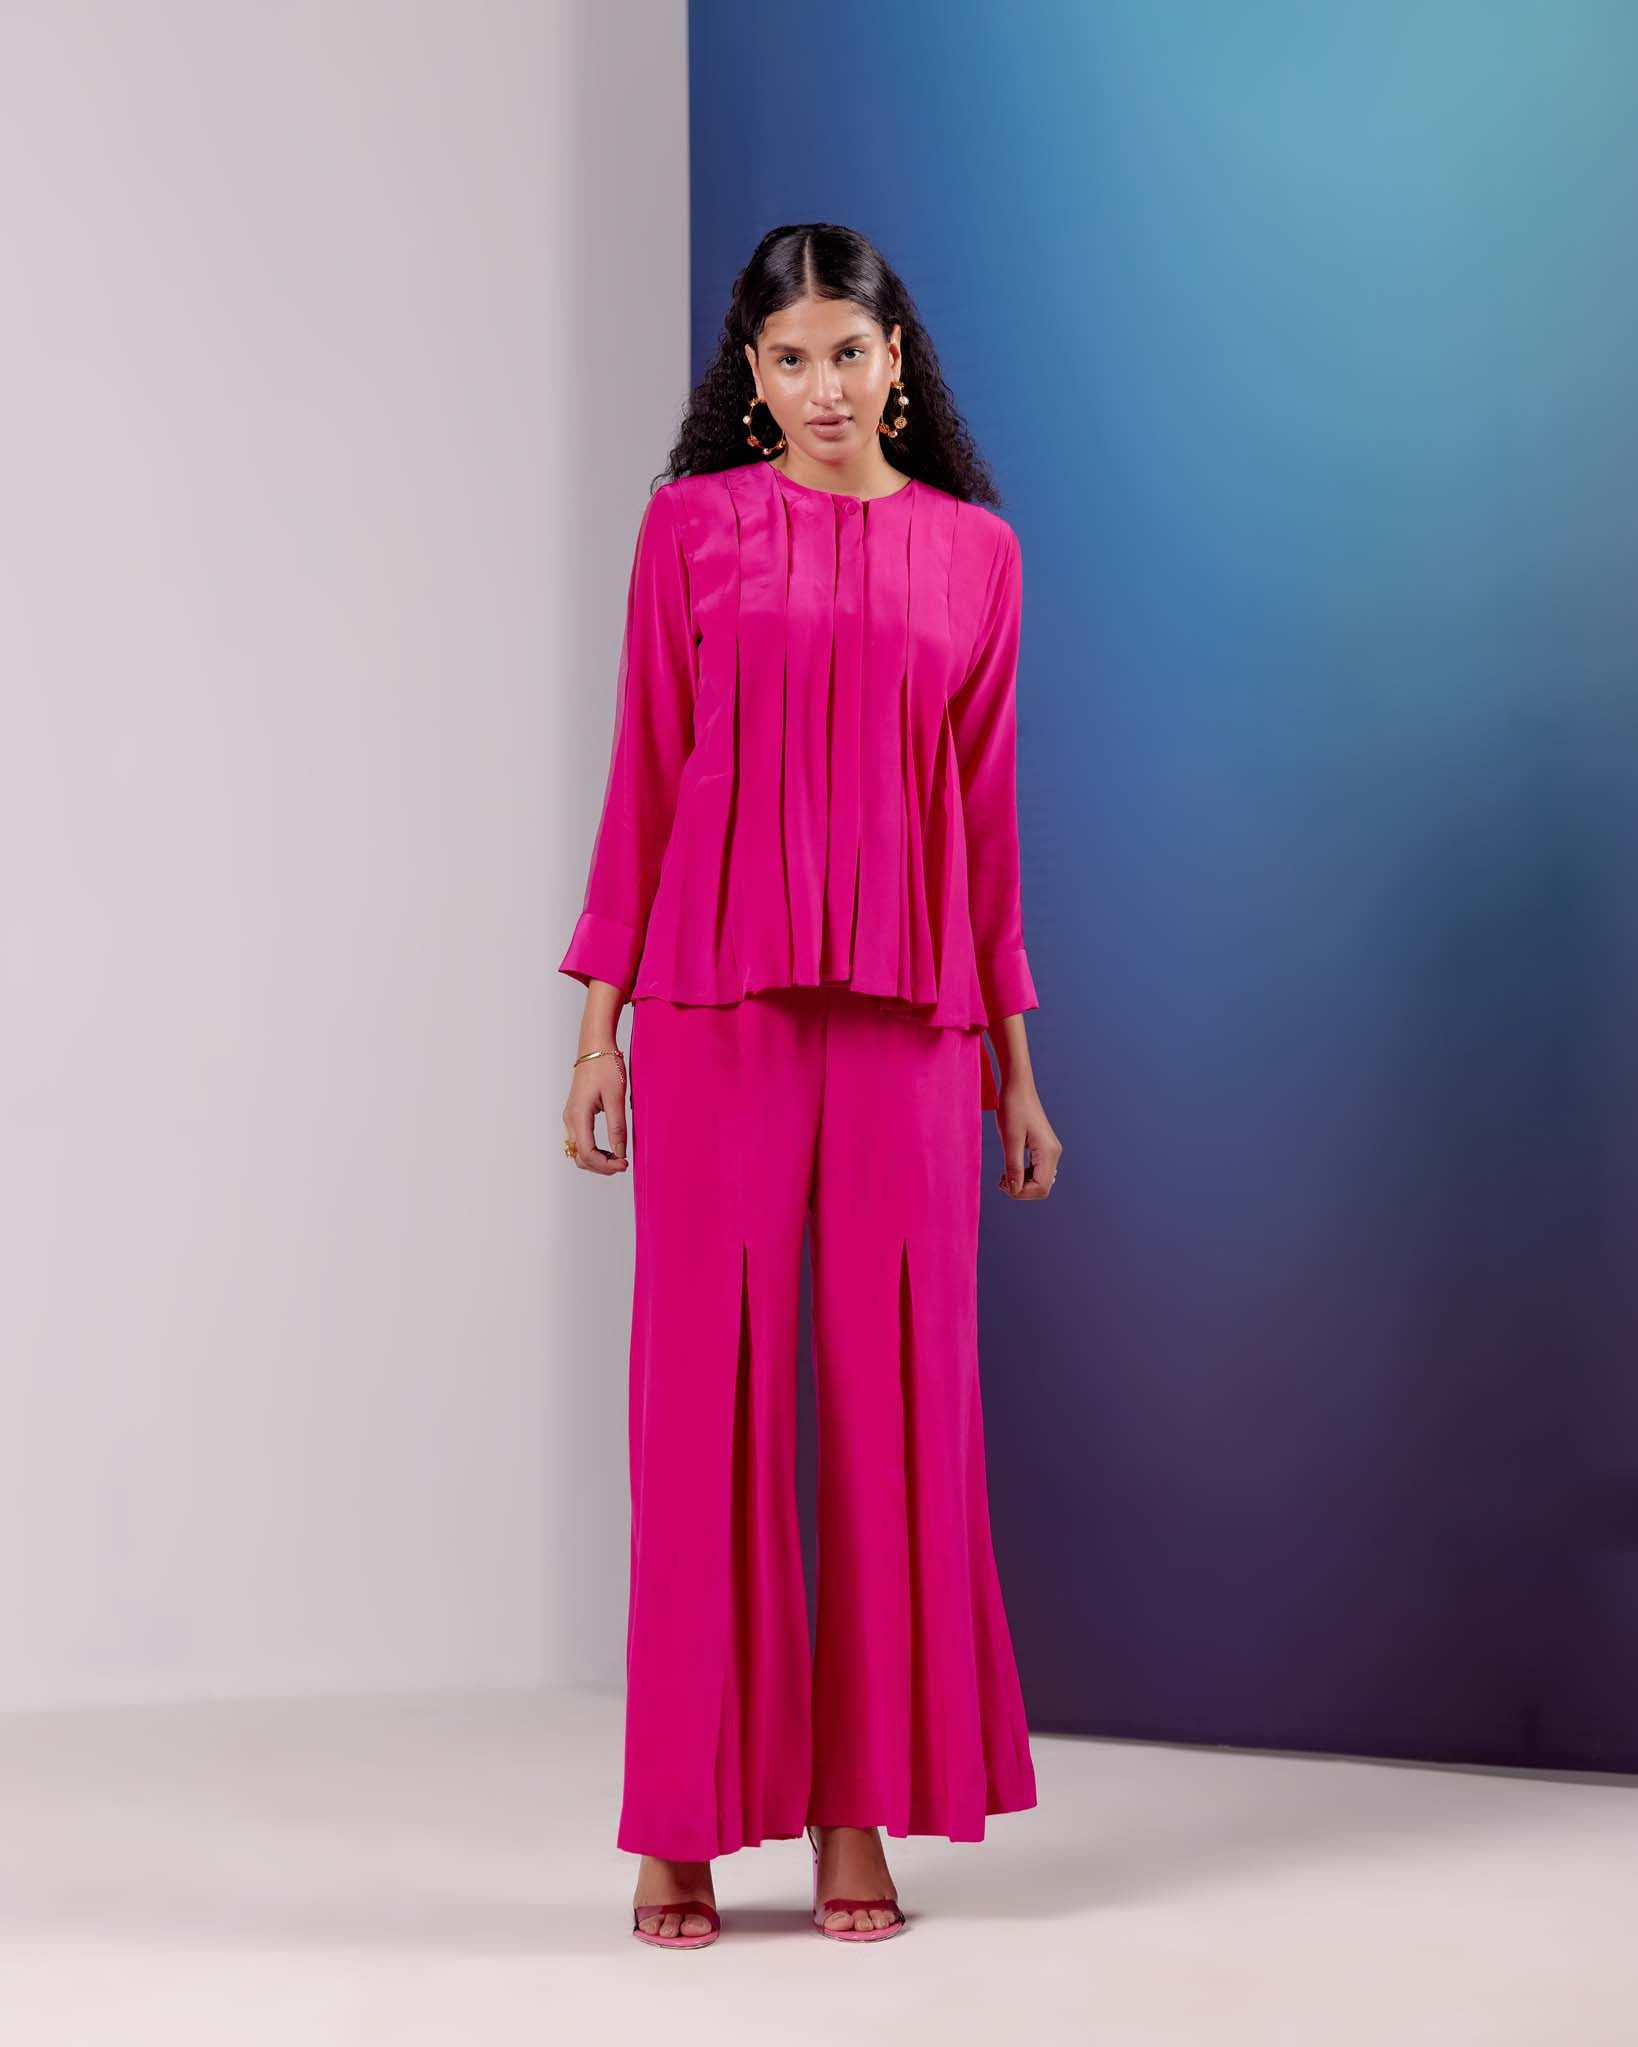 Hot Pink Box Pleat Coords